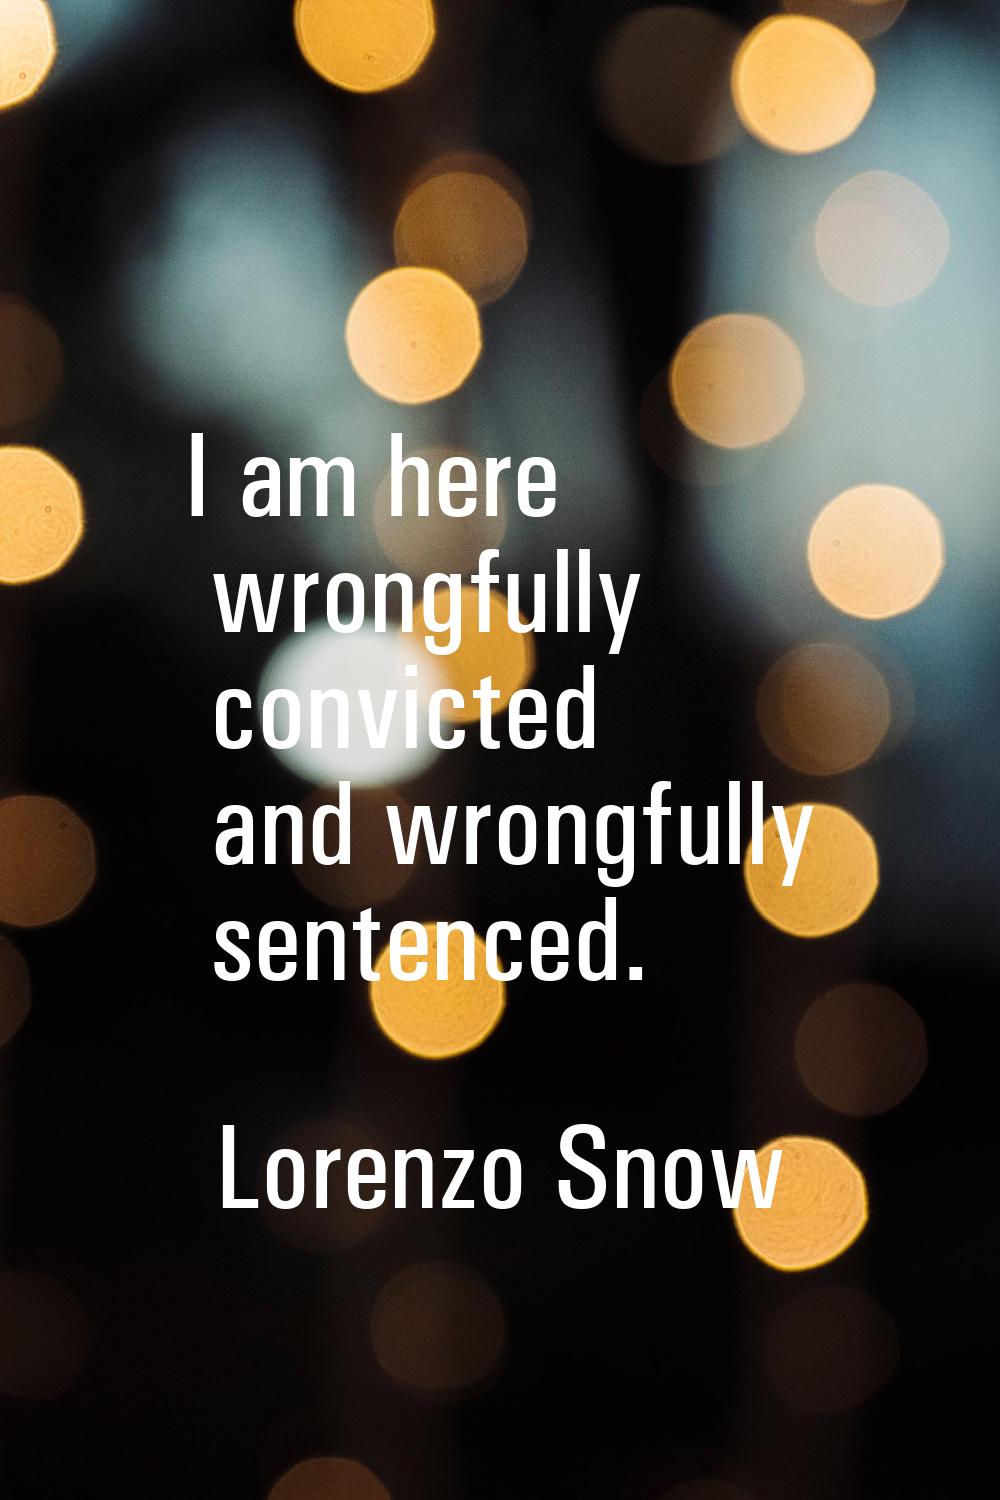 I am here wrongfully convicted and wrongfully sentenced.